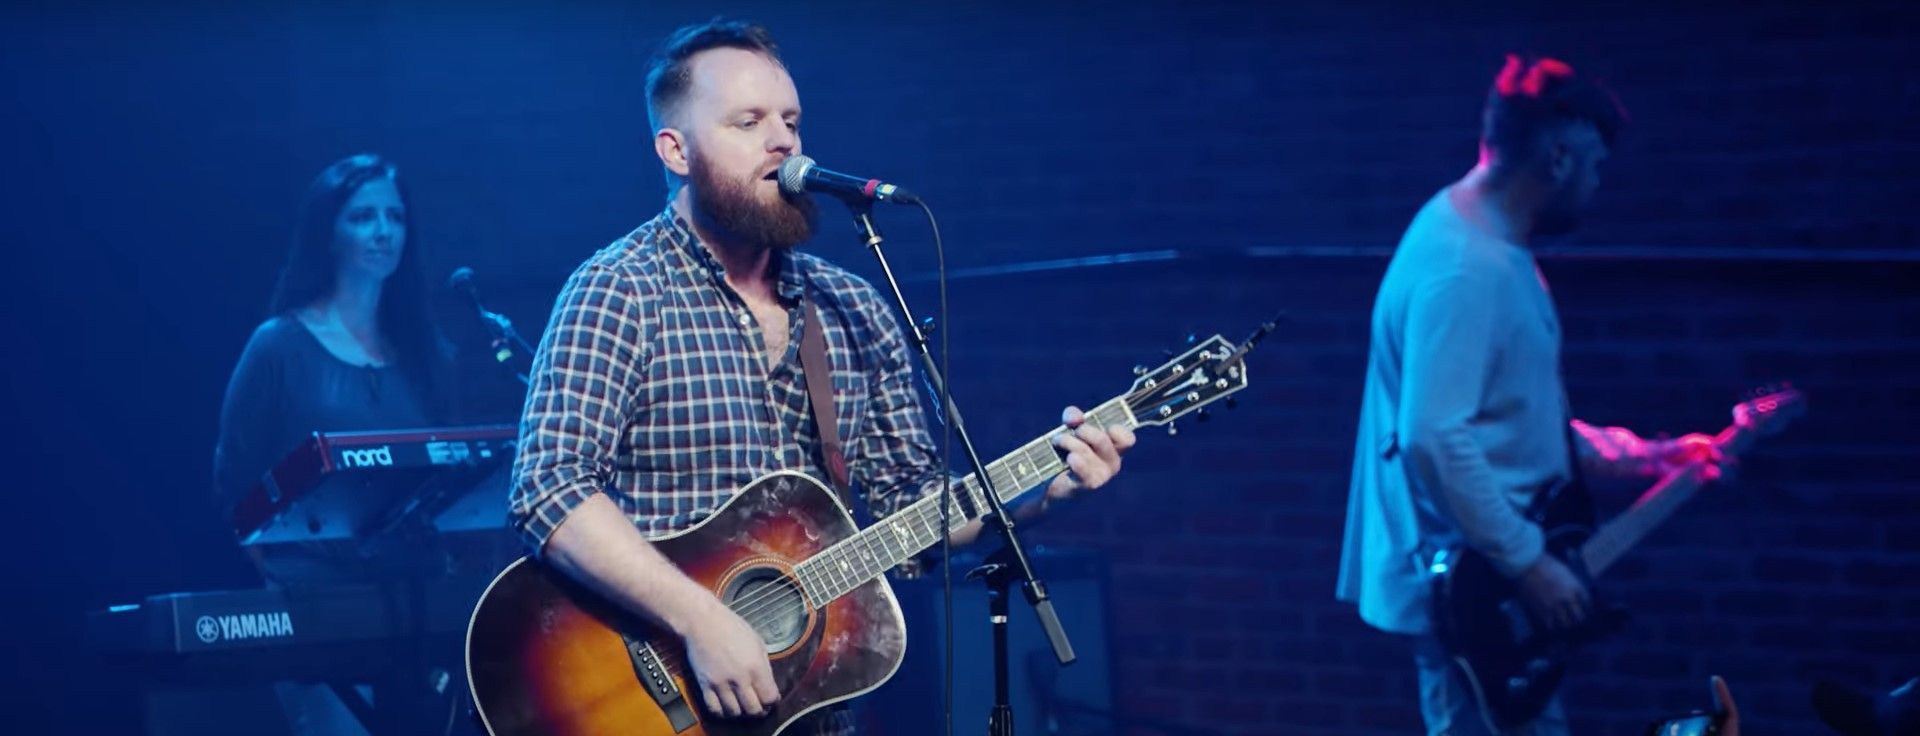 Aaron West And The Roaring Twenties - God & The Billboards (Live From Asbury Park 2019)